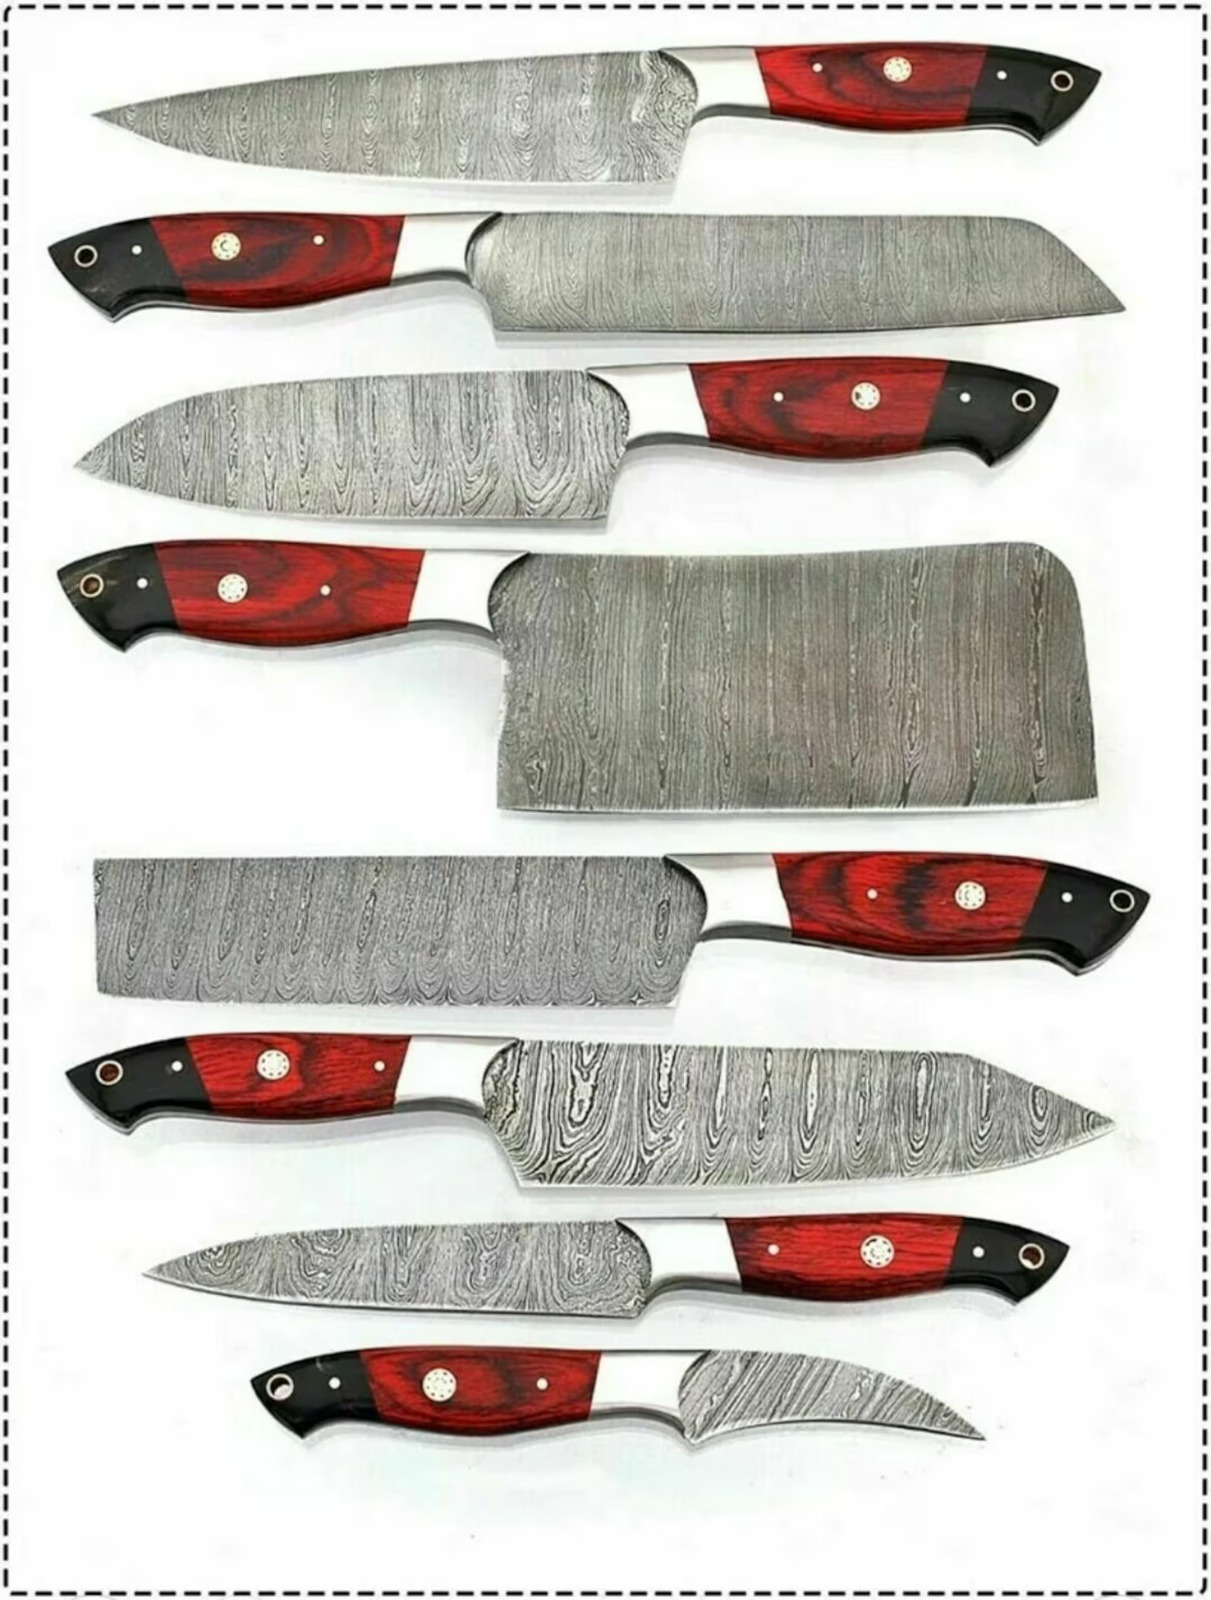 Handmade HAND FORGED DAMASCUS STEEL 9 pcs CHEF KNIFE Set Kitchen Knives